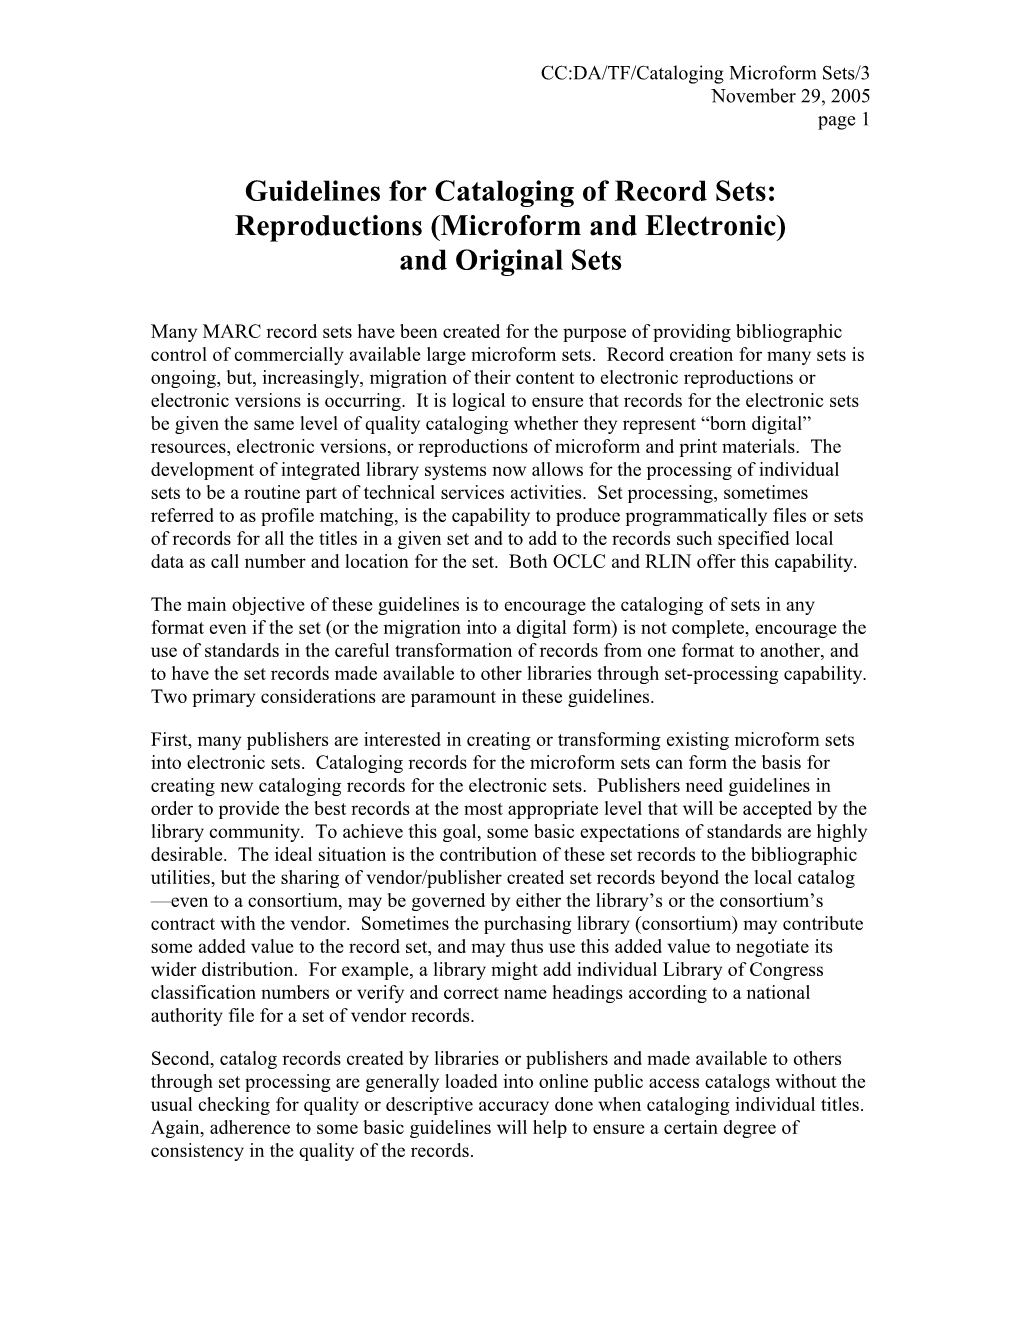 Guidelines for Cataloging of Record Sets: Reproductions (Microform and Electronic) And